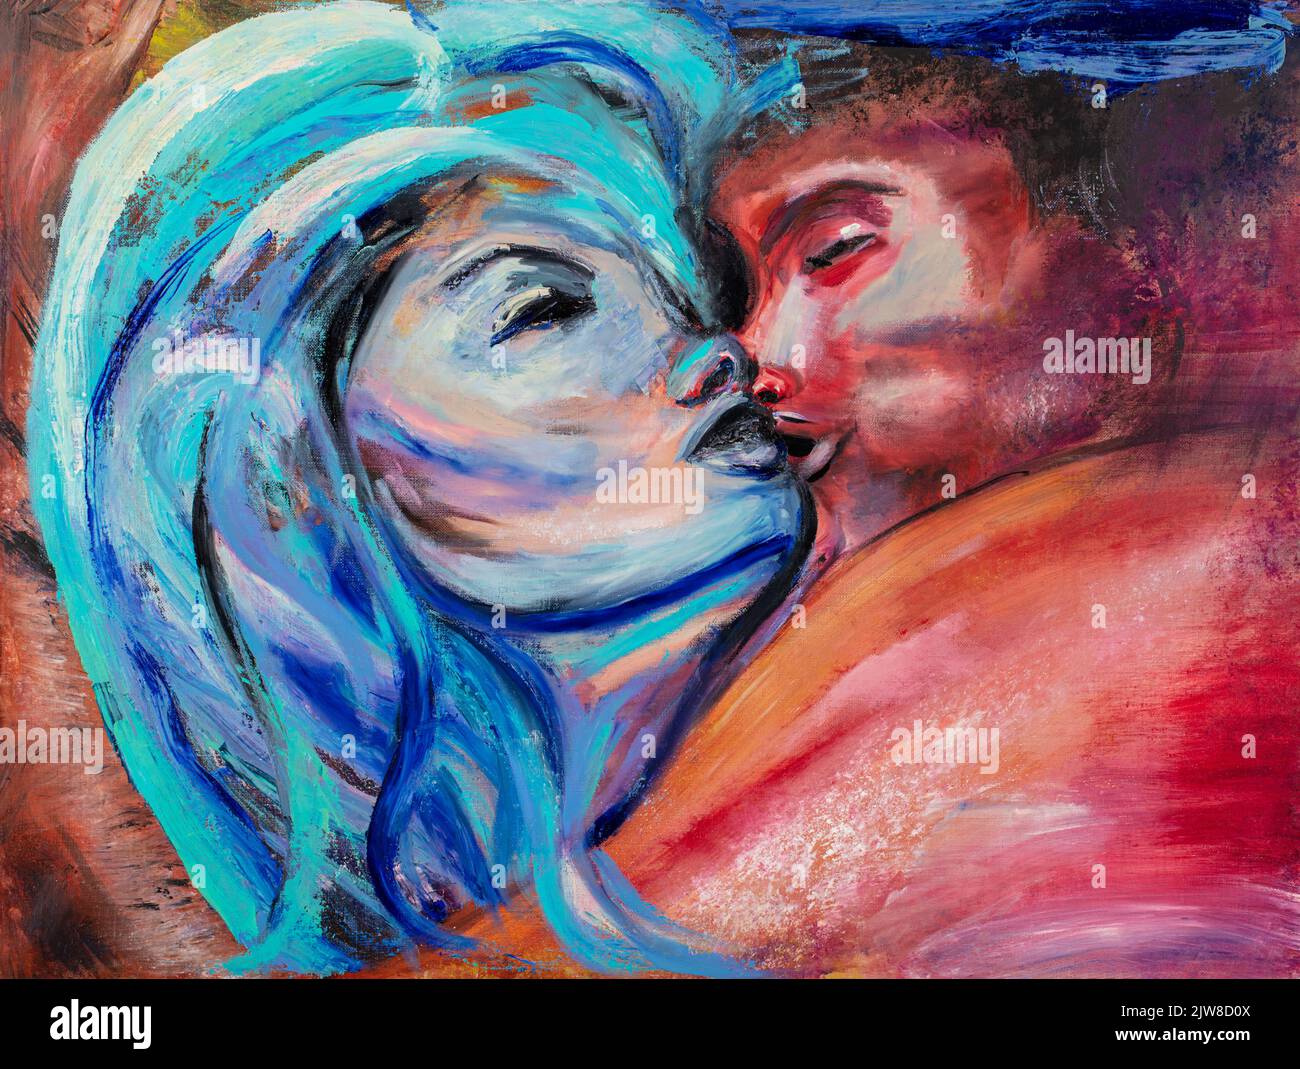 New awesome painting background with a face of mother and child. Stock Photo